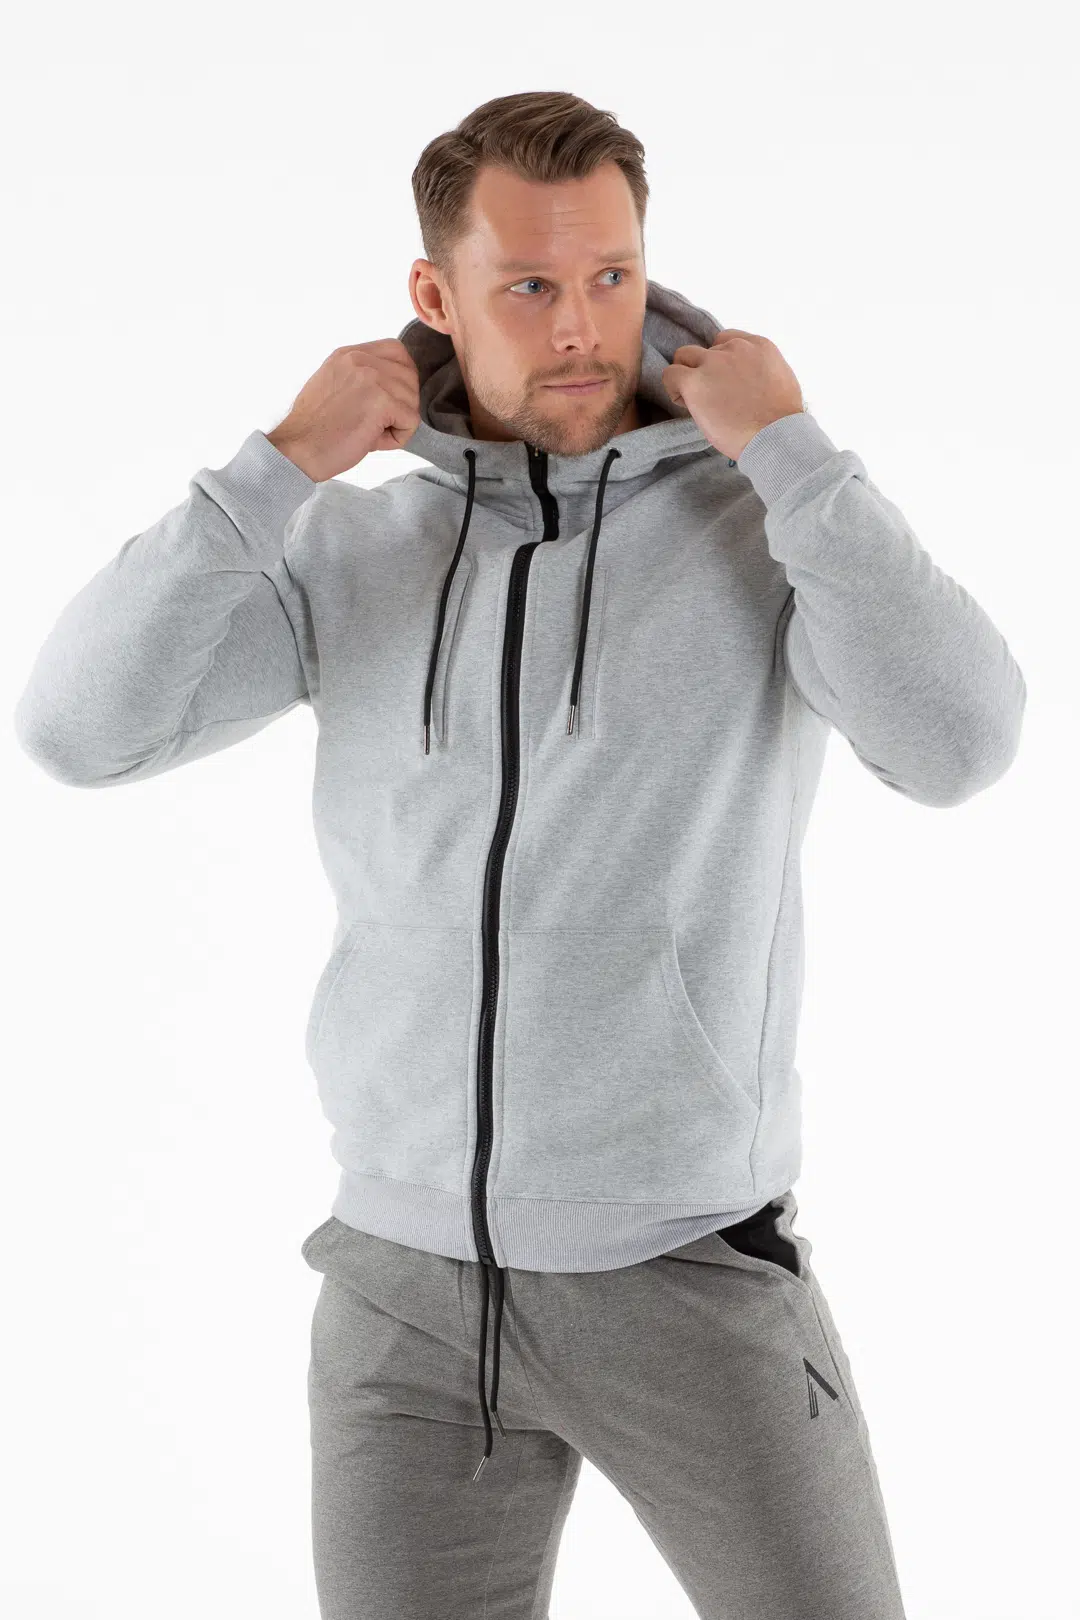 Stylish Premium Workout Apparel of The Highest Quality.